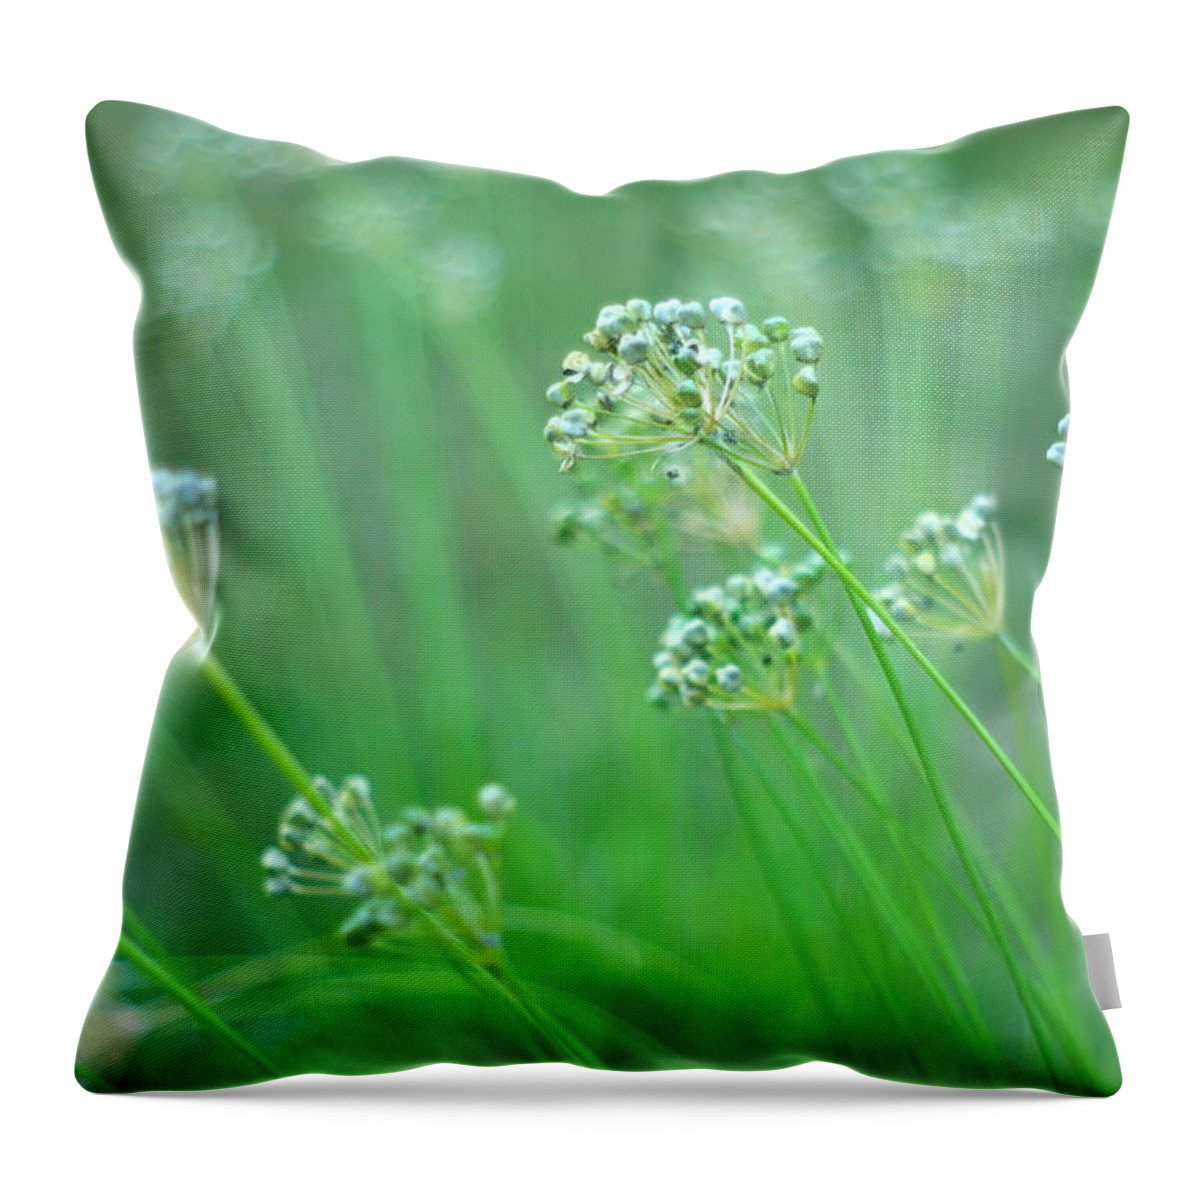 Chive Throw Pillow featuring the photograph Chive Garden by Suzanne Powers